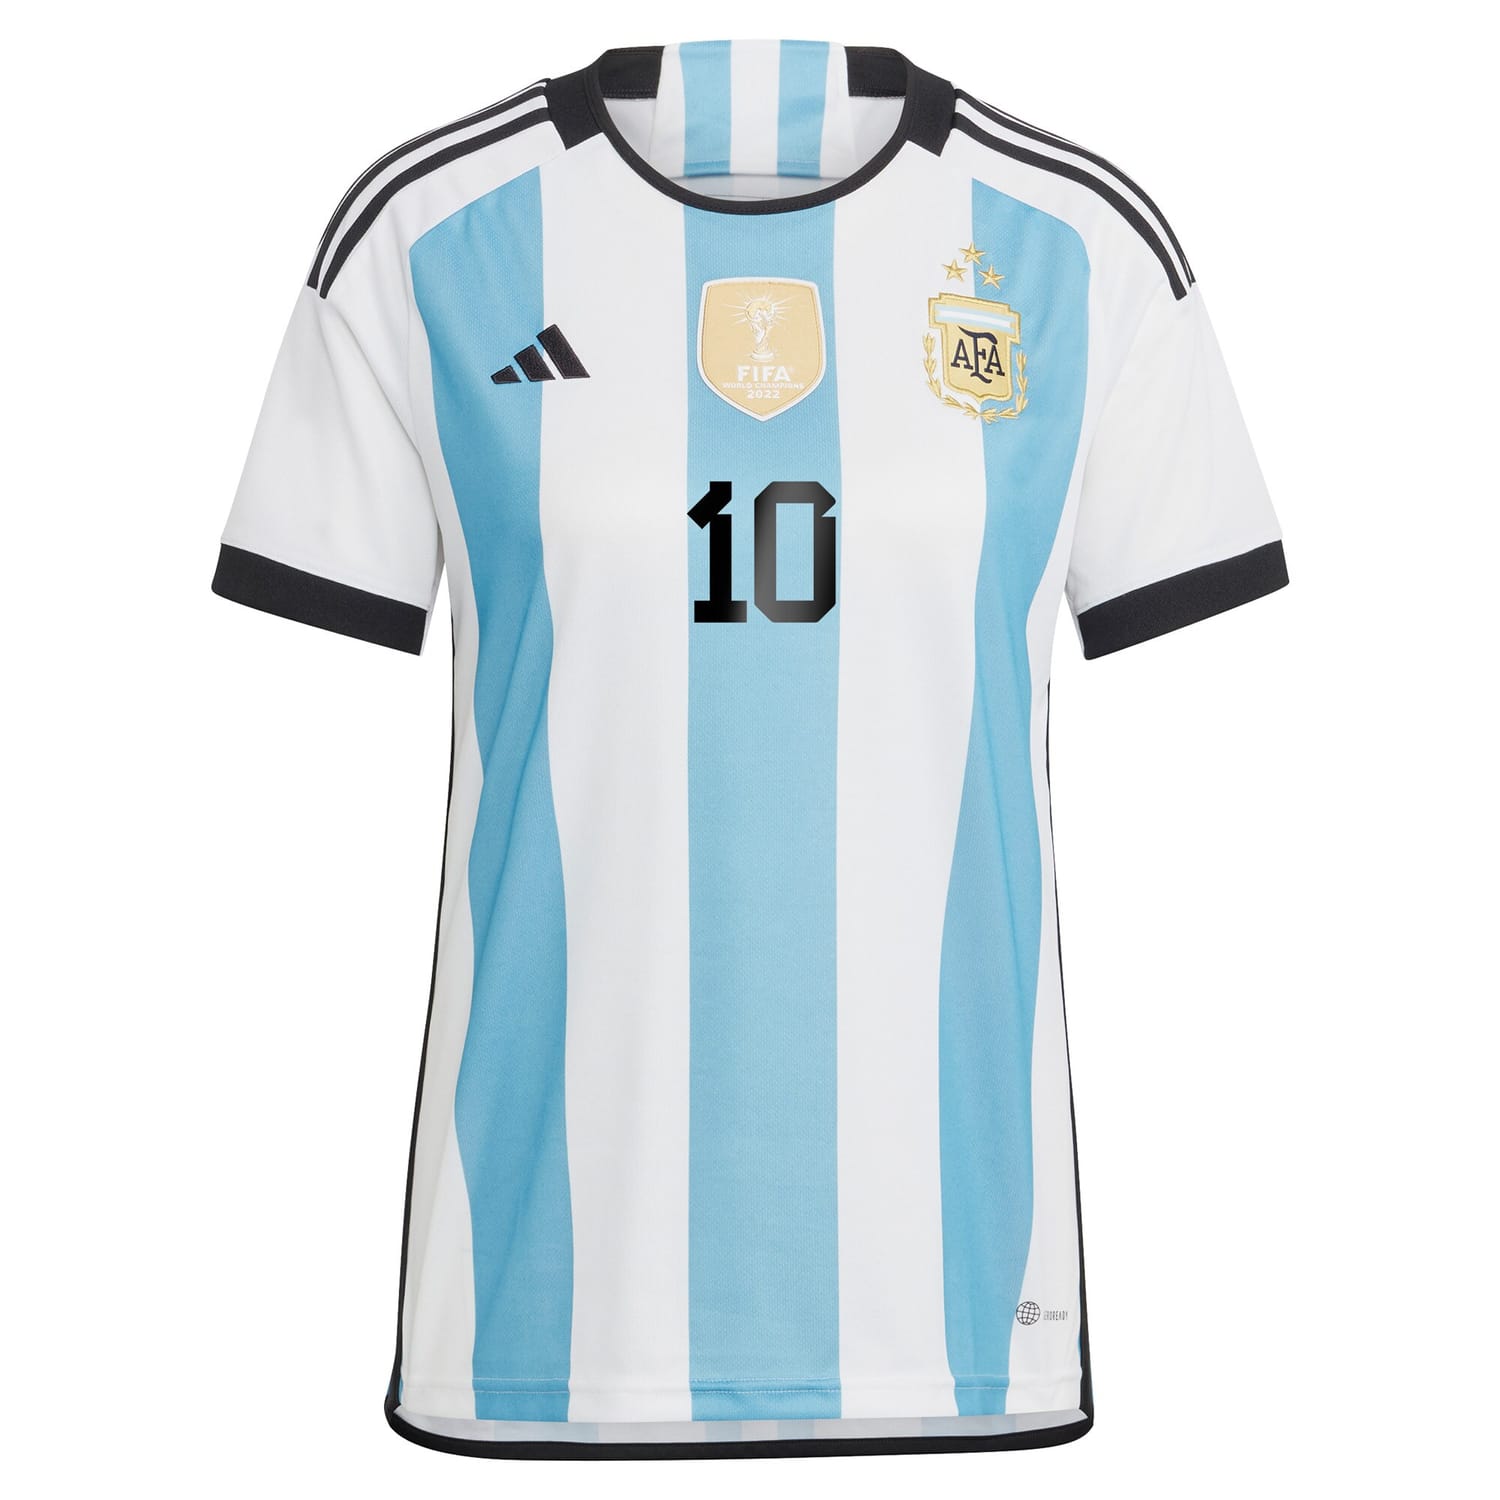 Champions Argentina National Team Home Winners Jersey Shirt White/Light Blue 2022 player Lionel Messi printing for Women